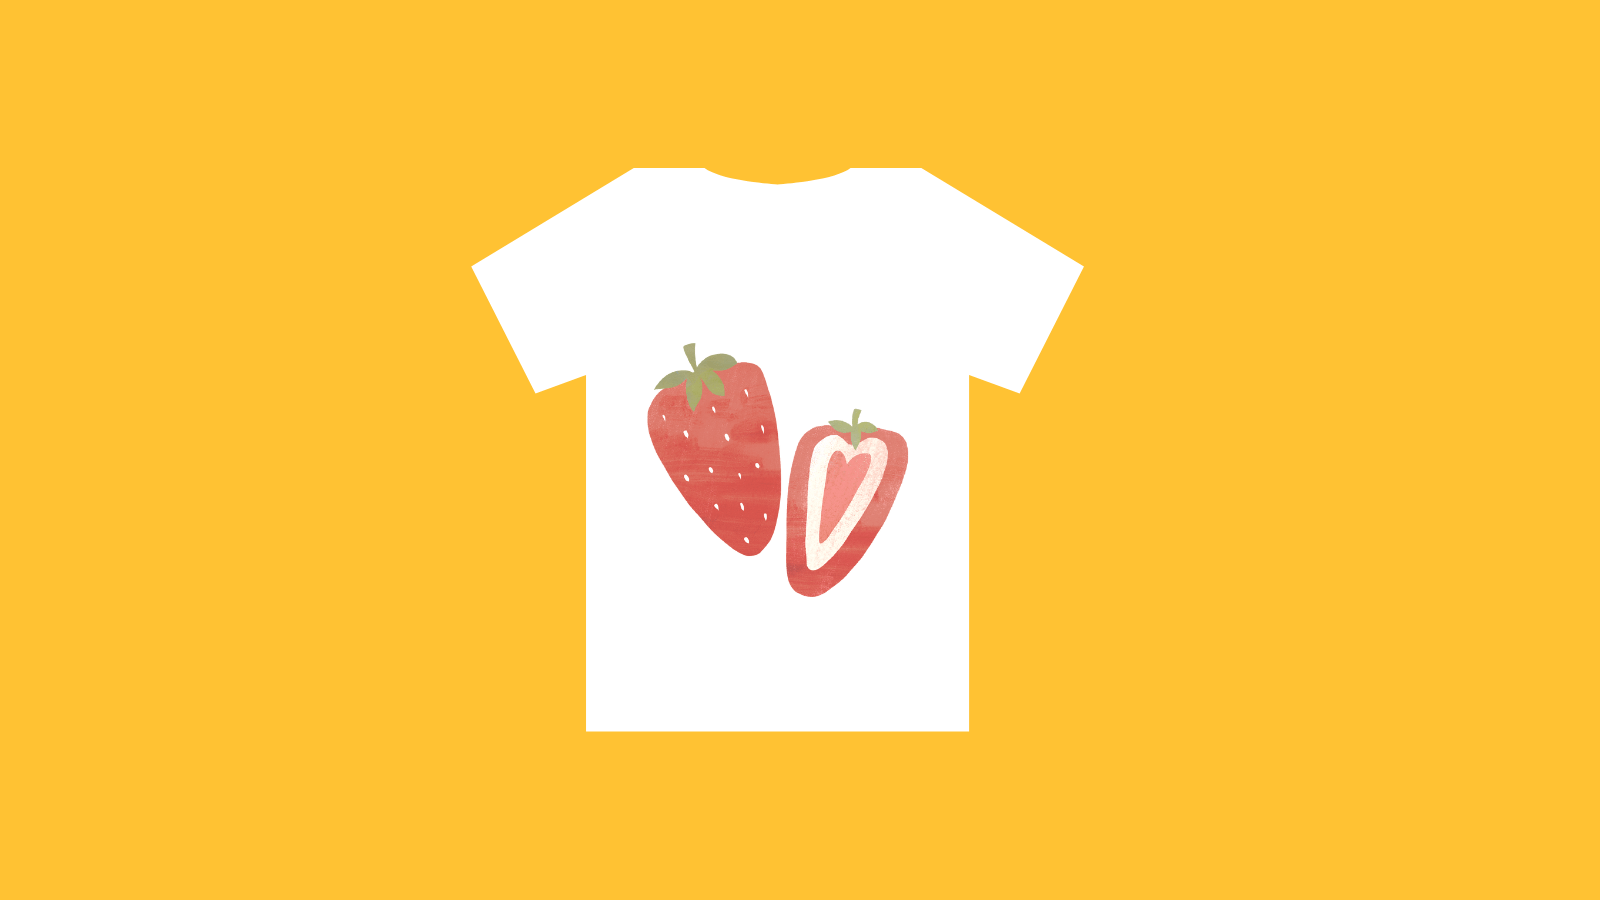 A T-shirt with strawberries on it